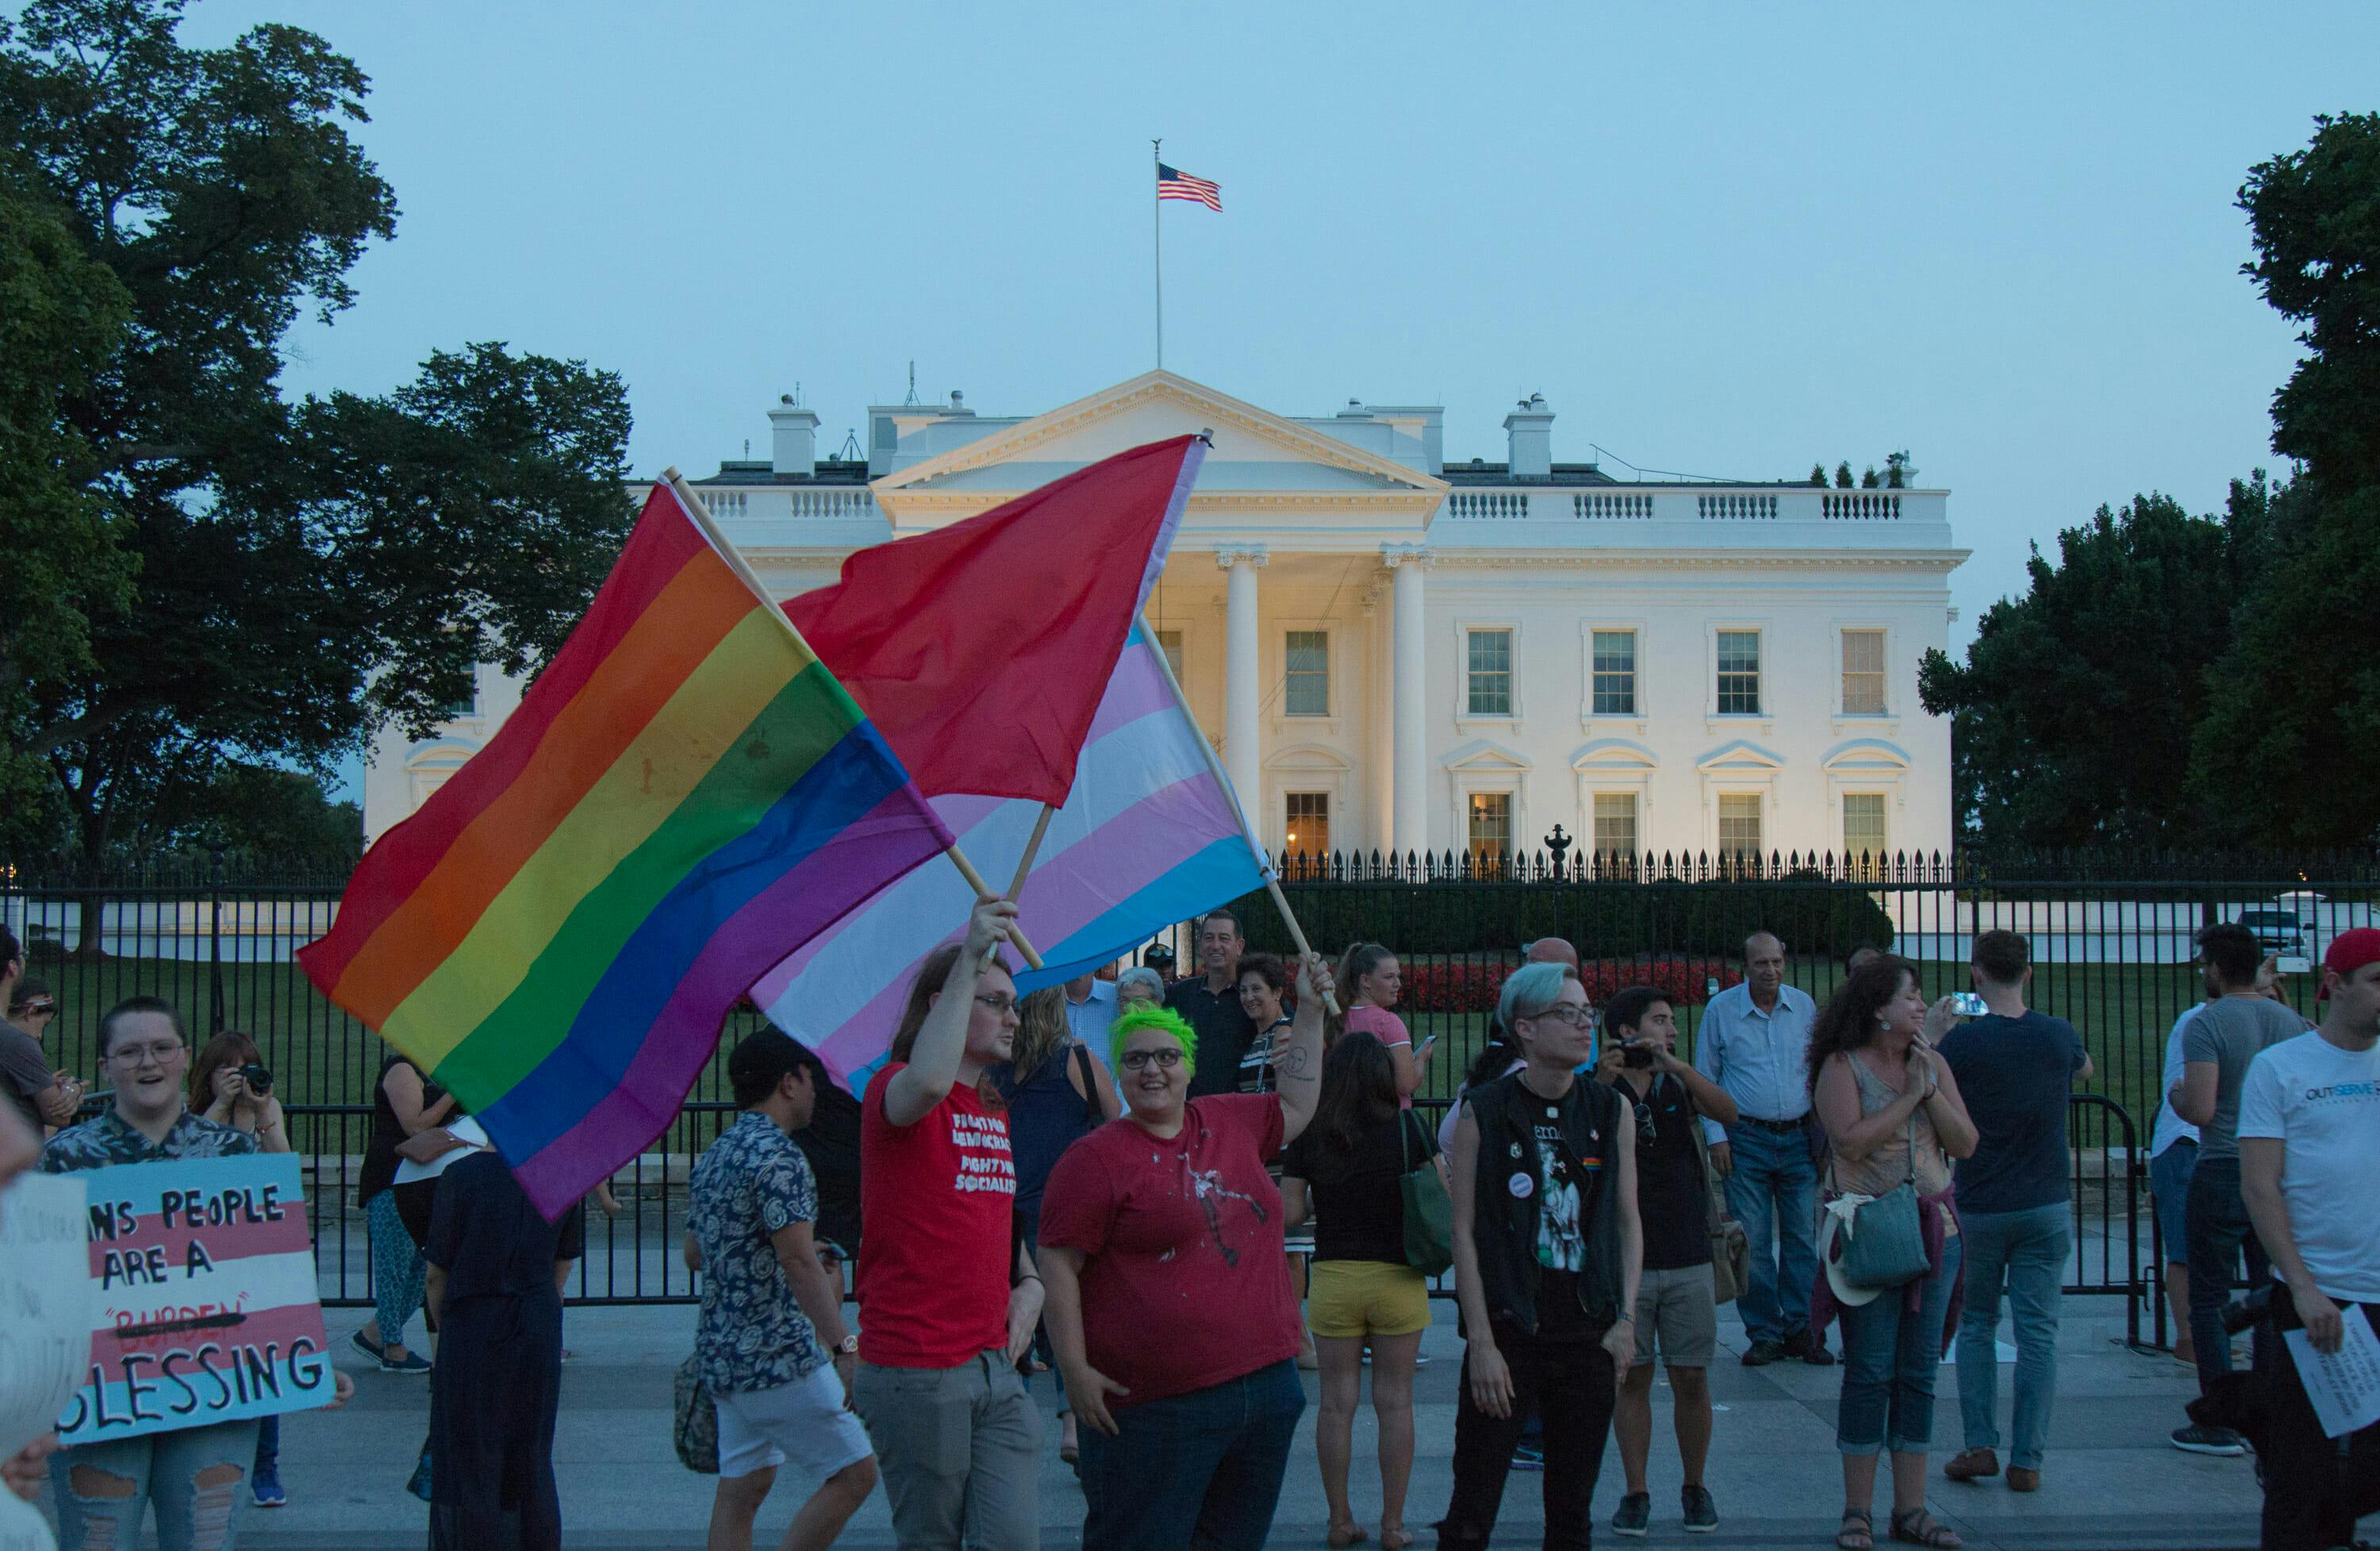 trans protest at white house